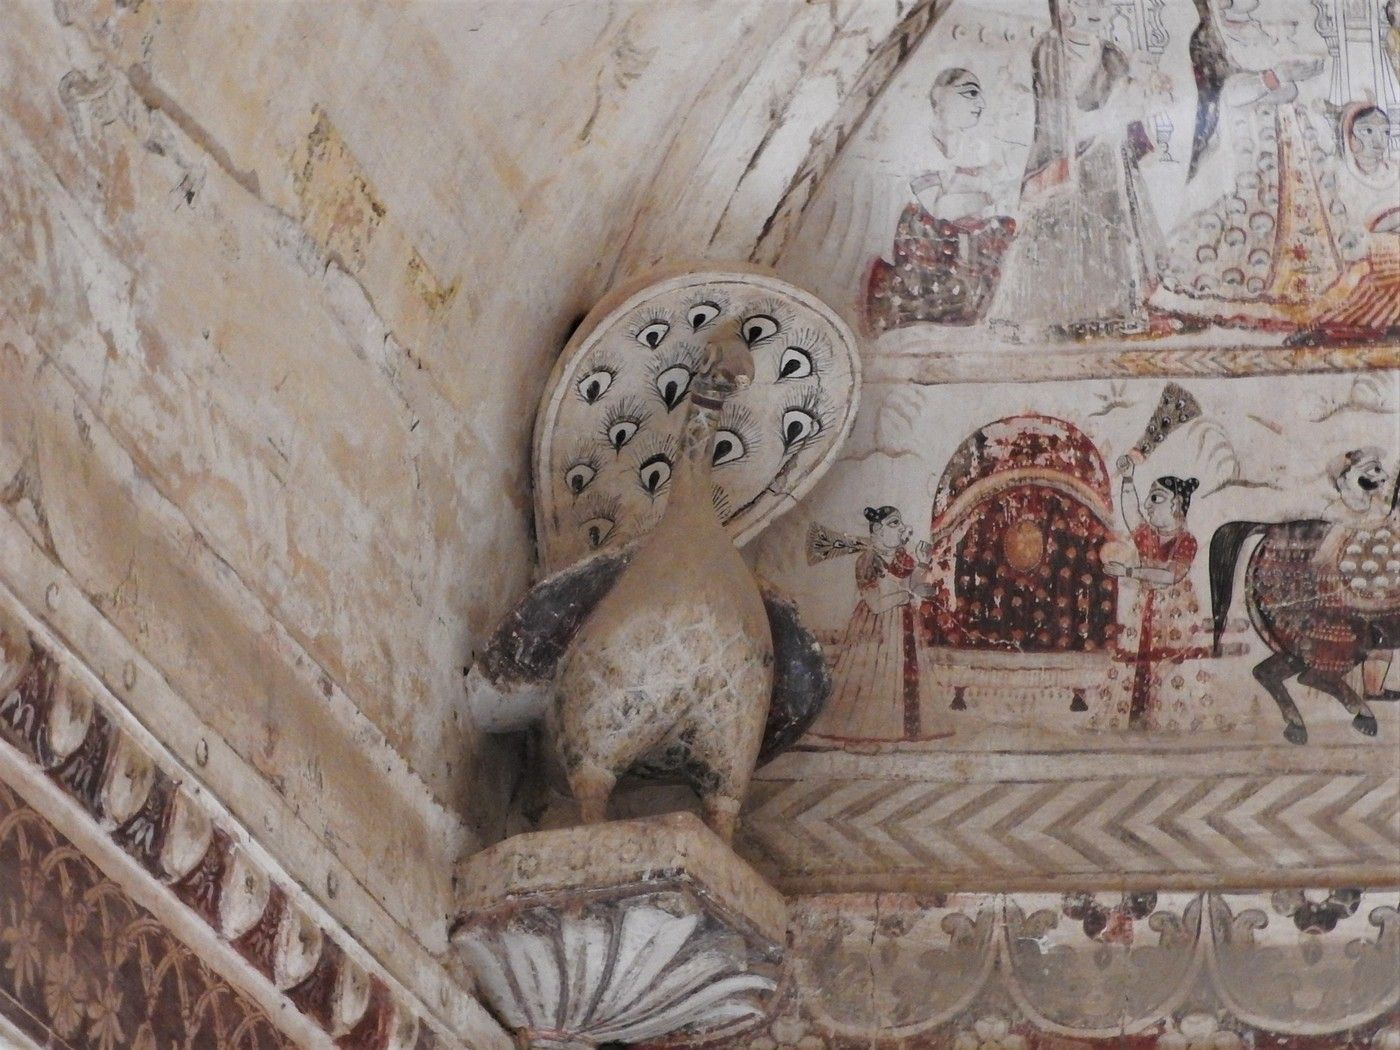 Every corner in Lakshmi Temple is adorned with peacocks. The aim was to separate the different paintings, and to decorate the corners, Orchha 